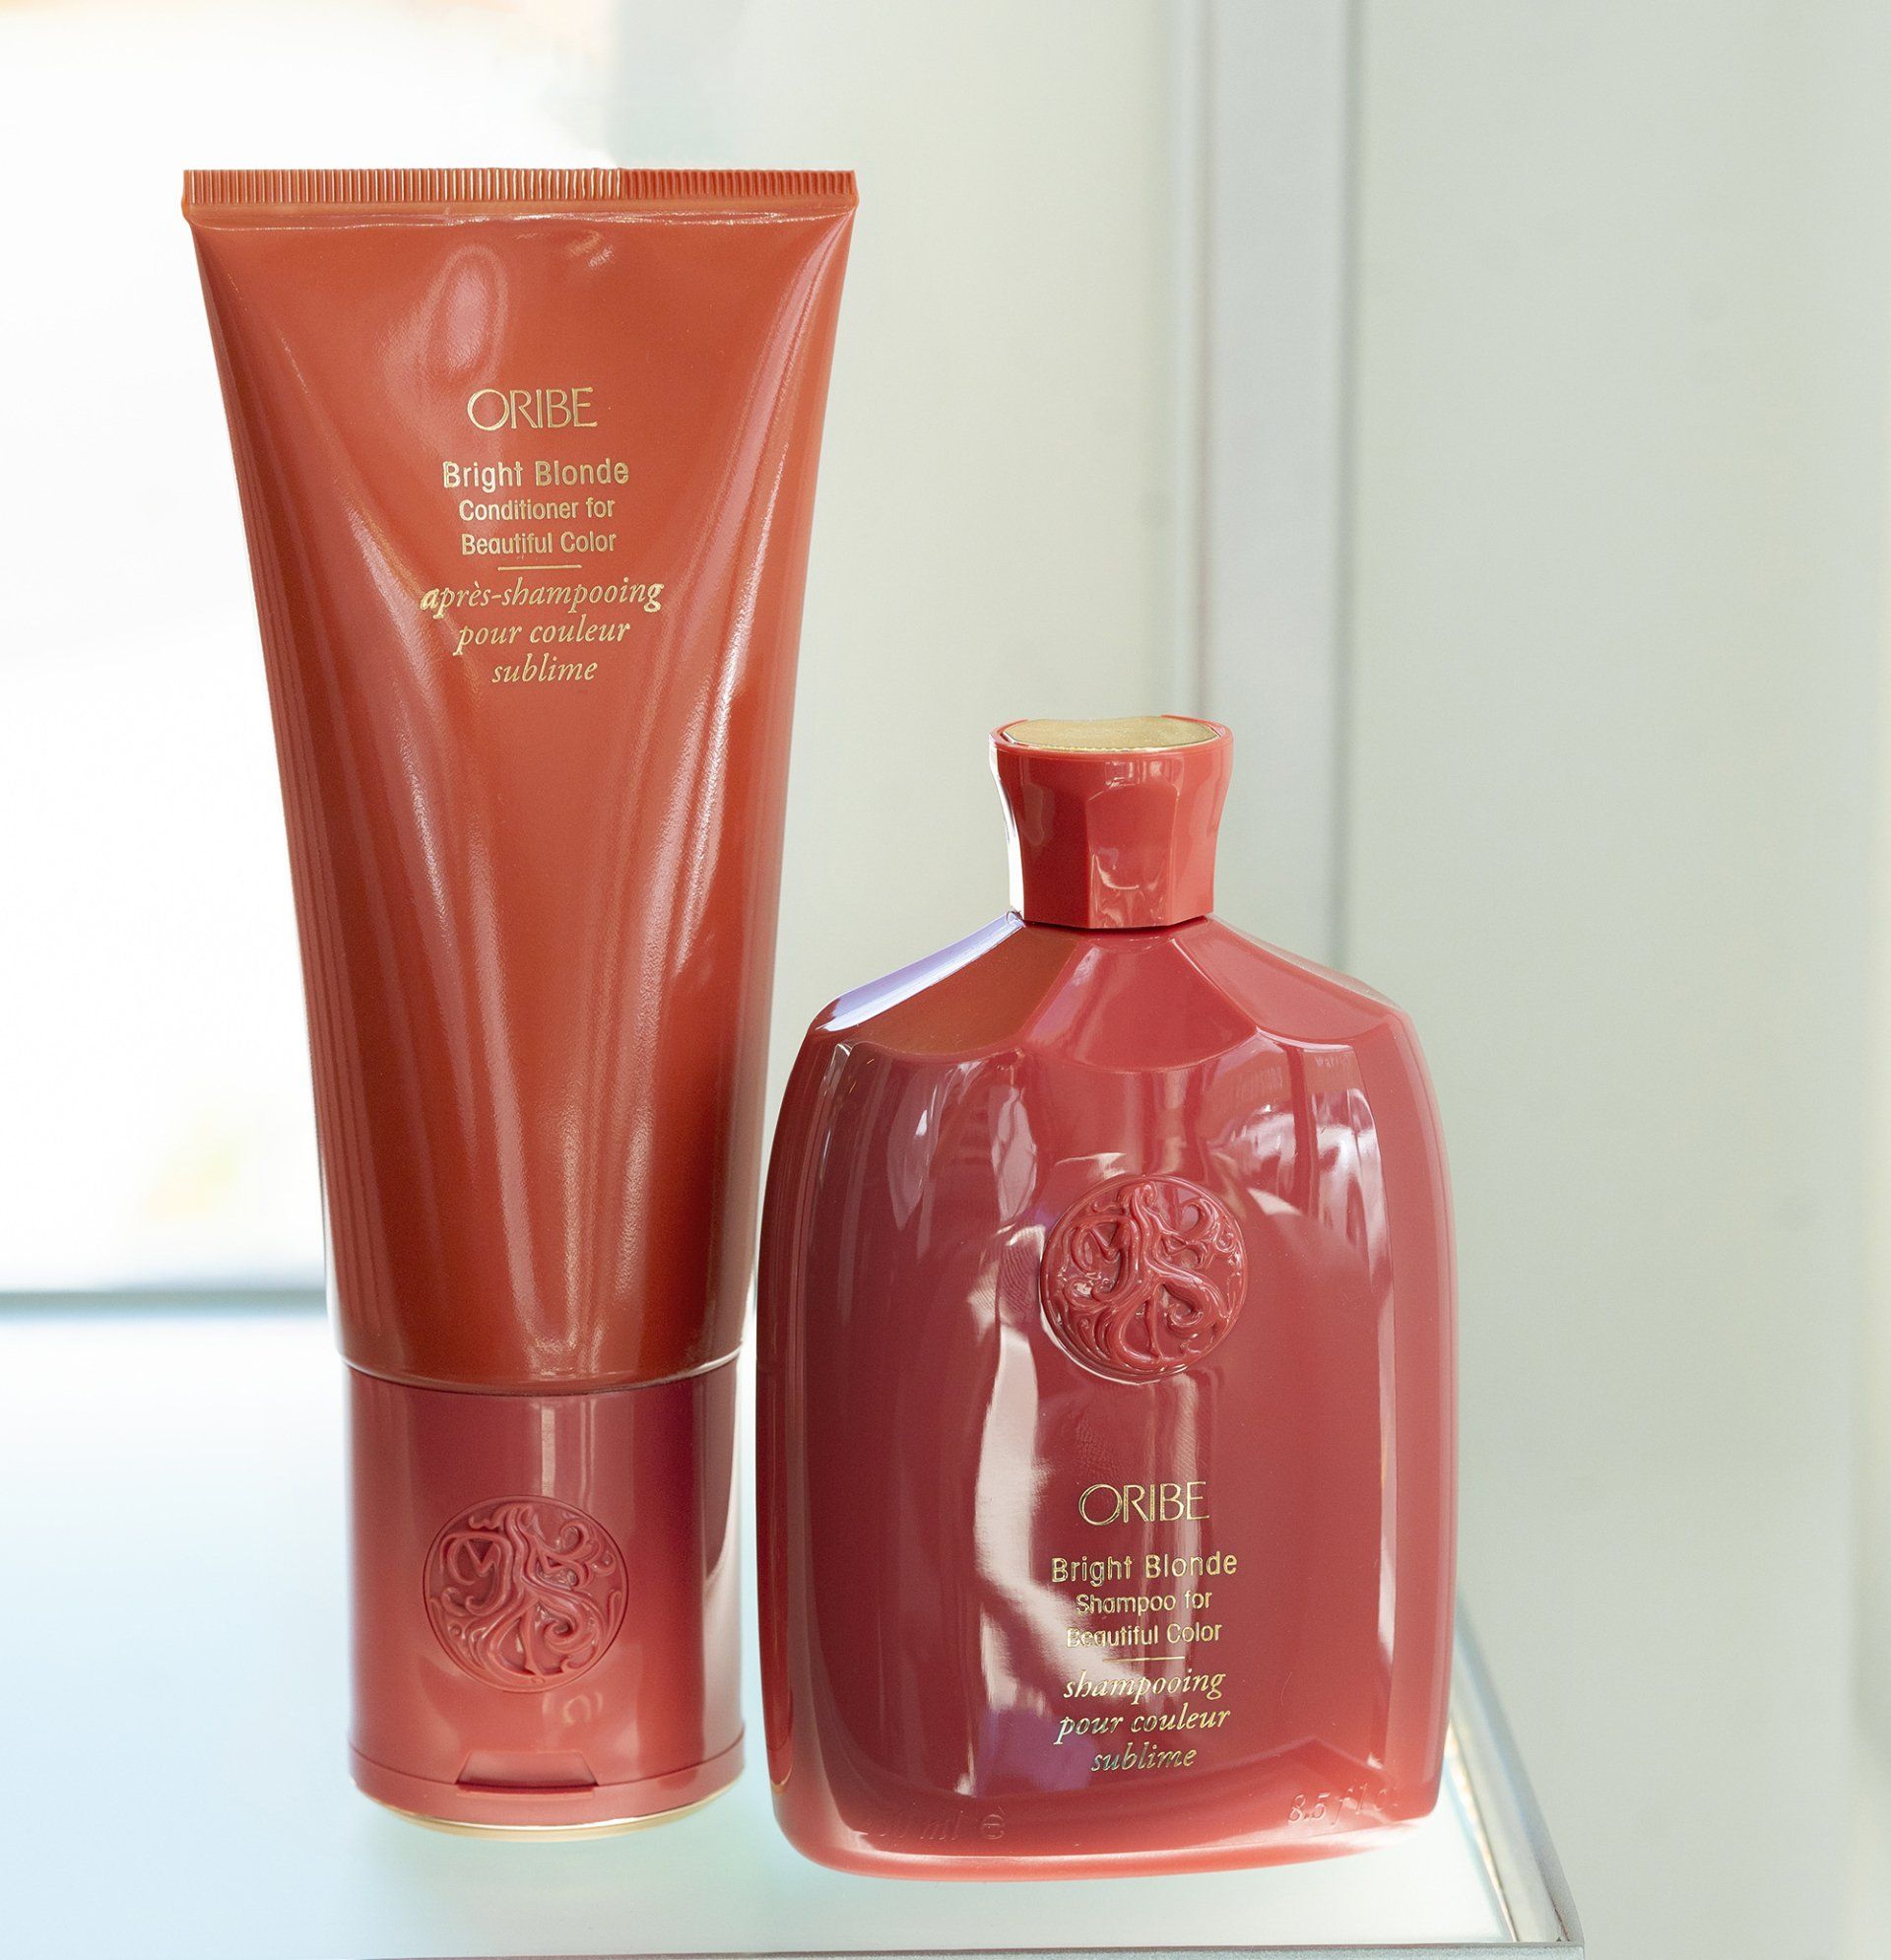 oribe hair products, salons that carry oribe hair products